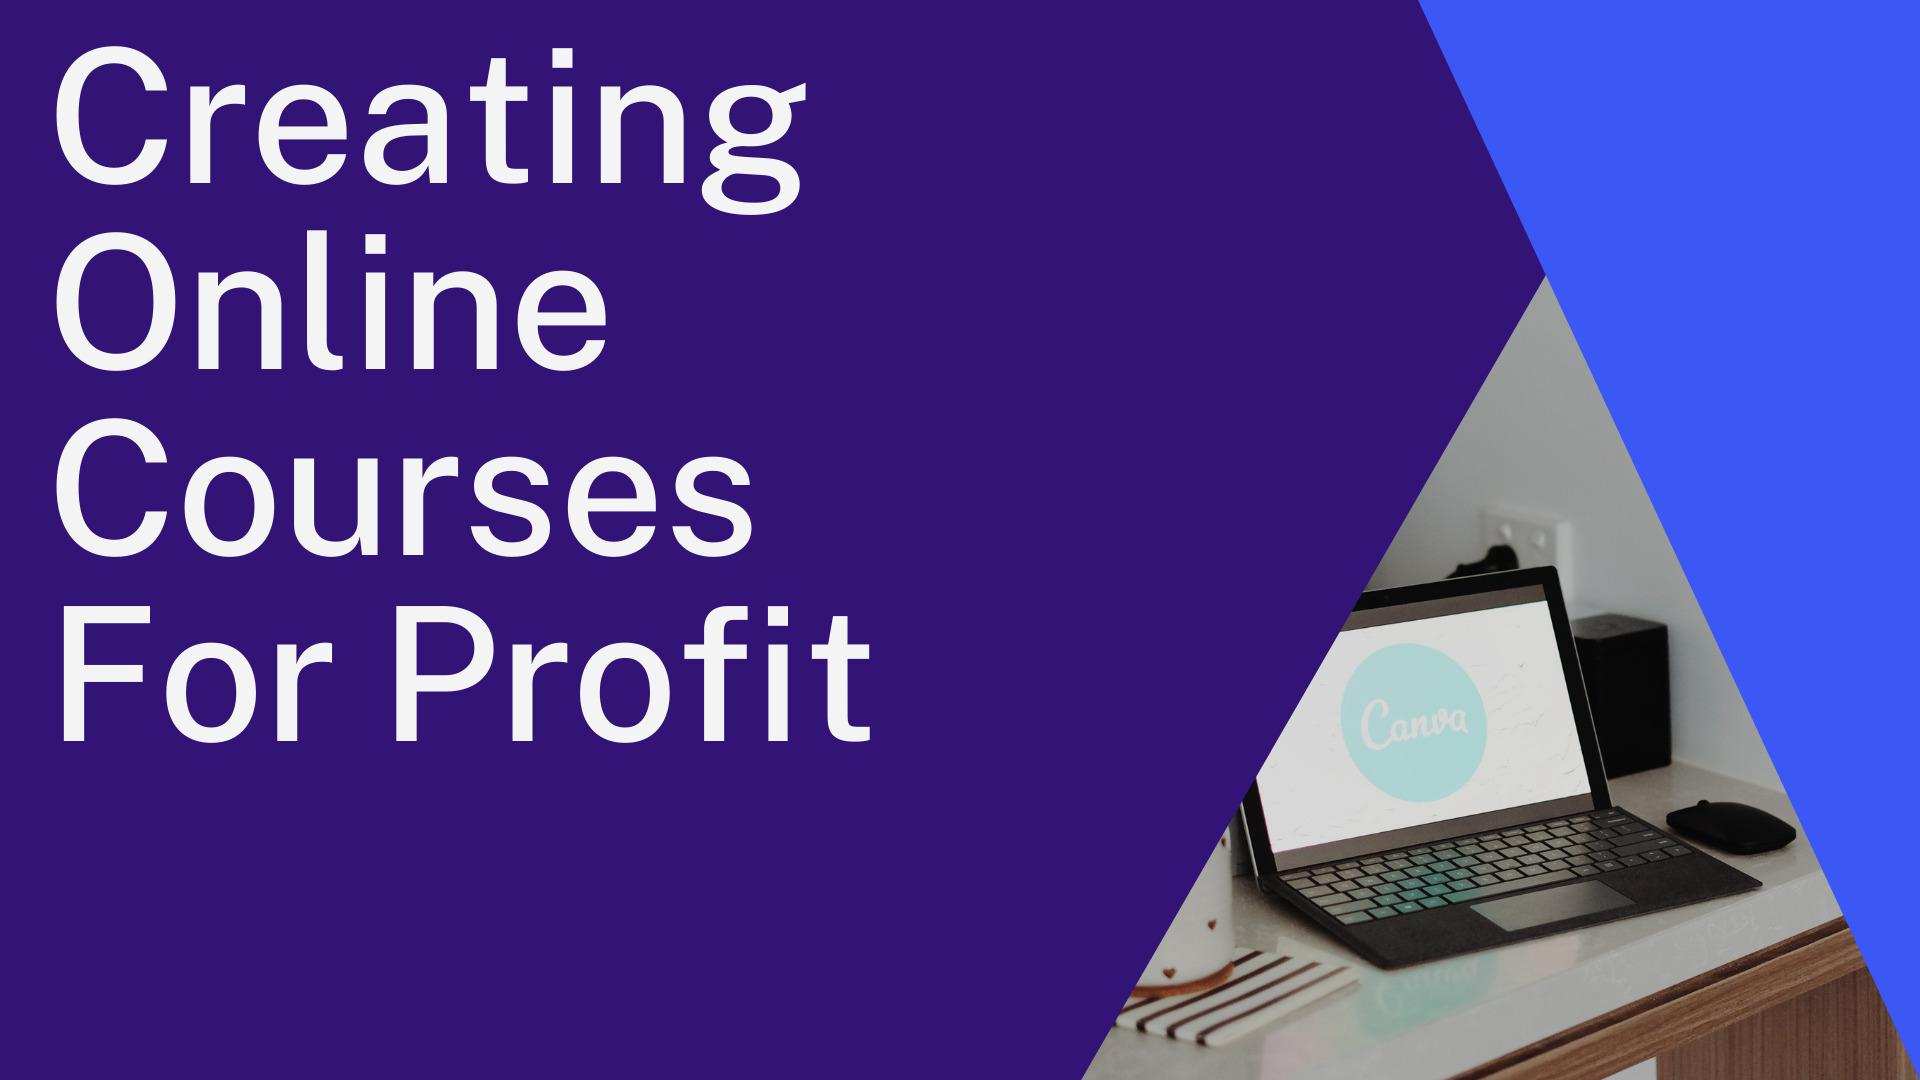 Creating Online Courses For Profit